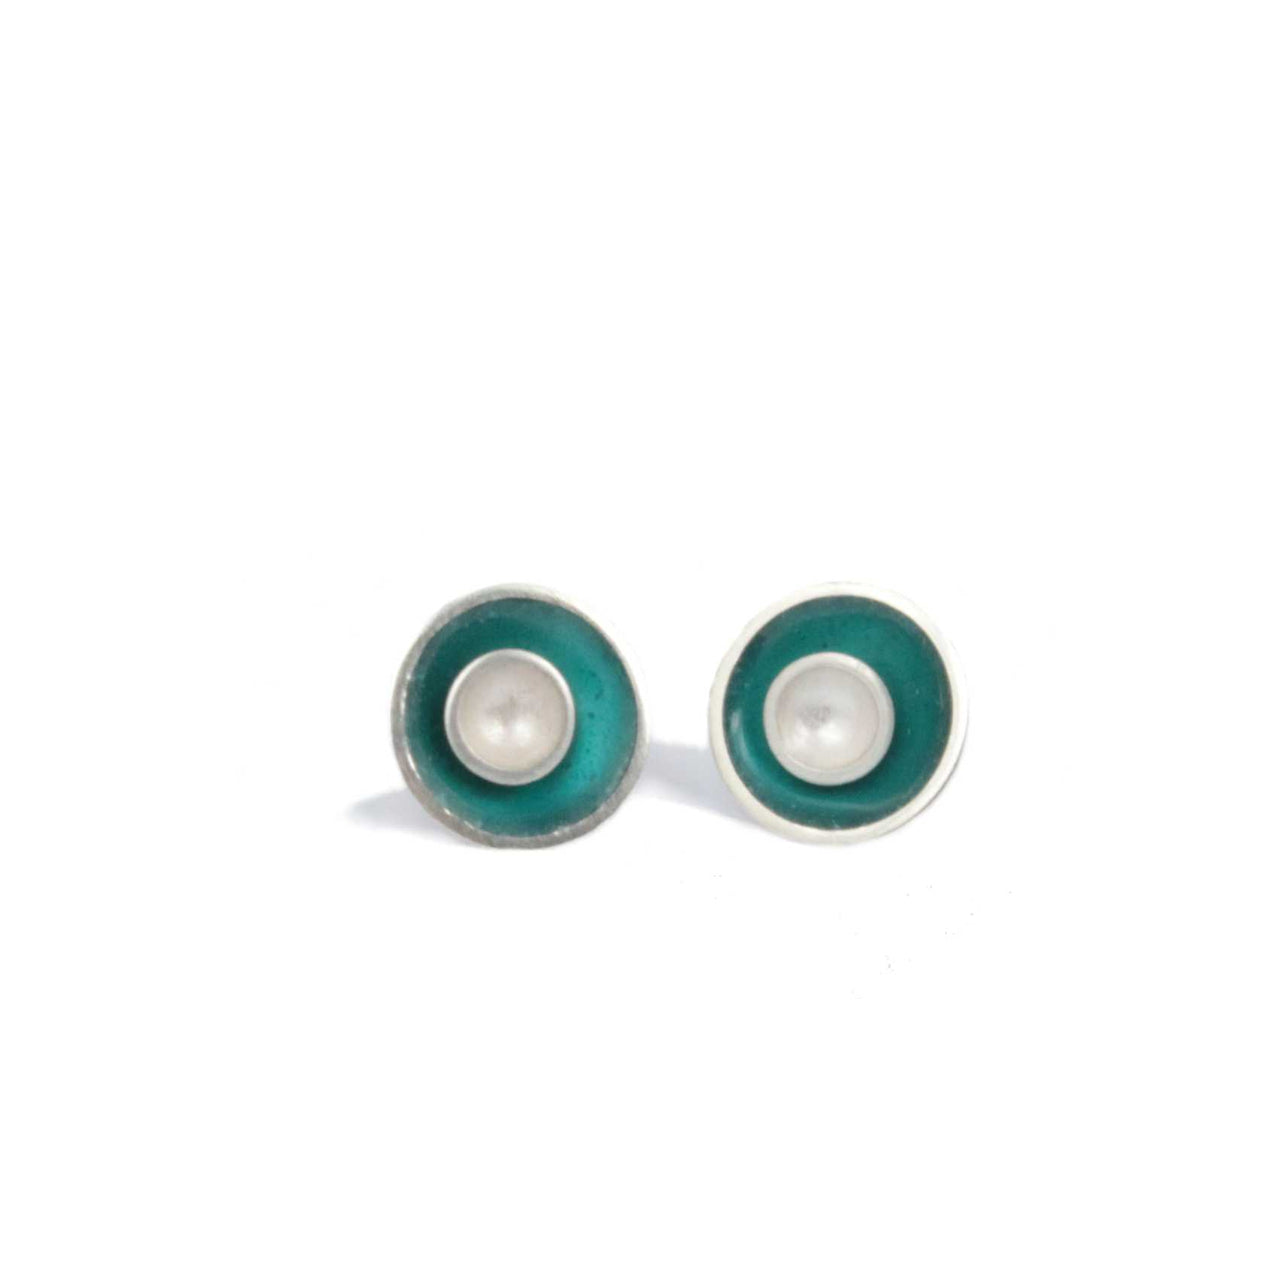 Small Target Studs - Teal